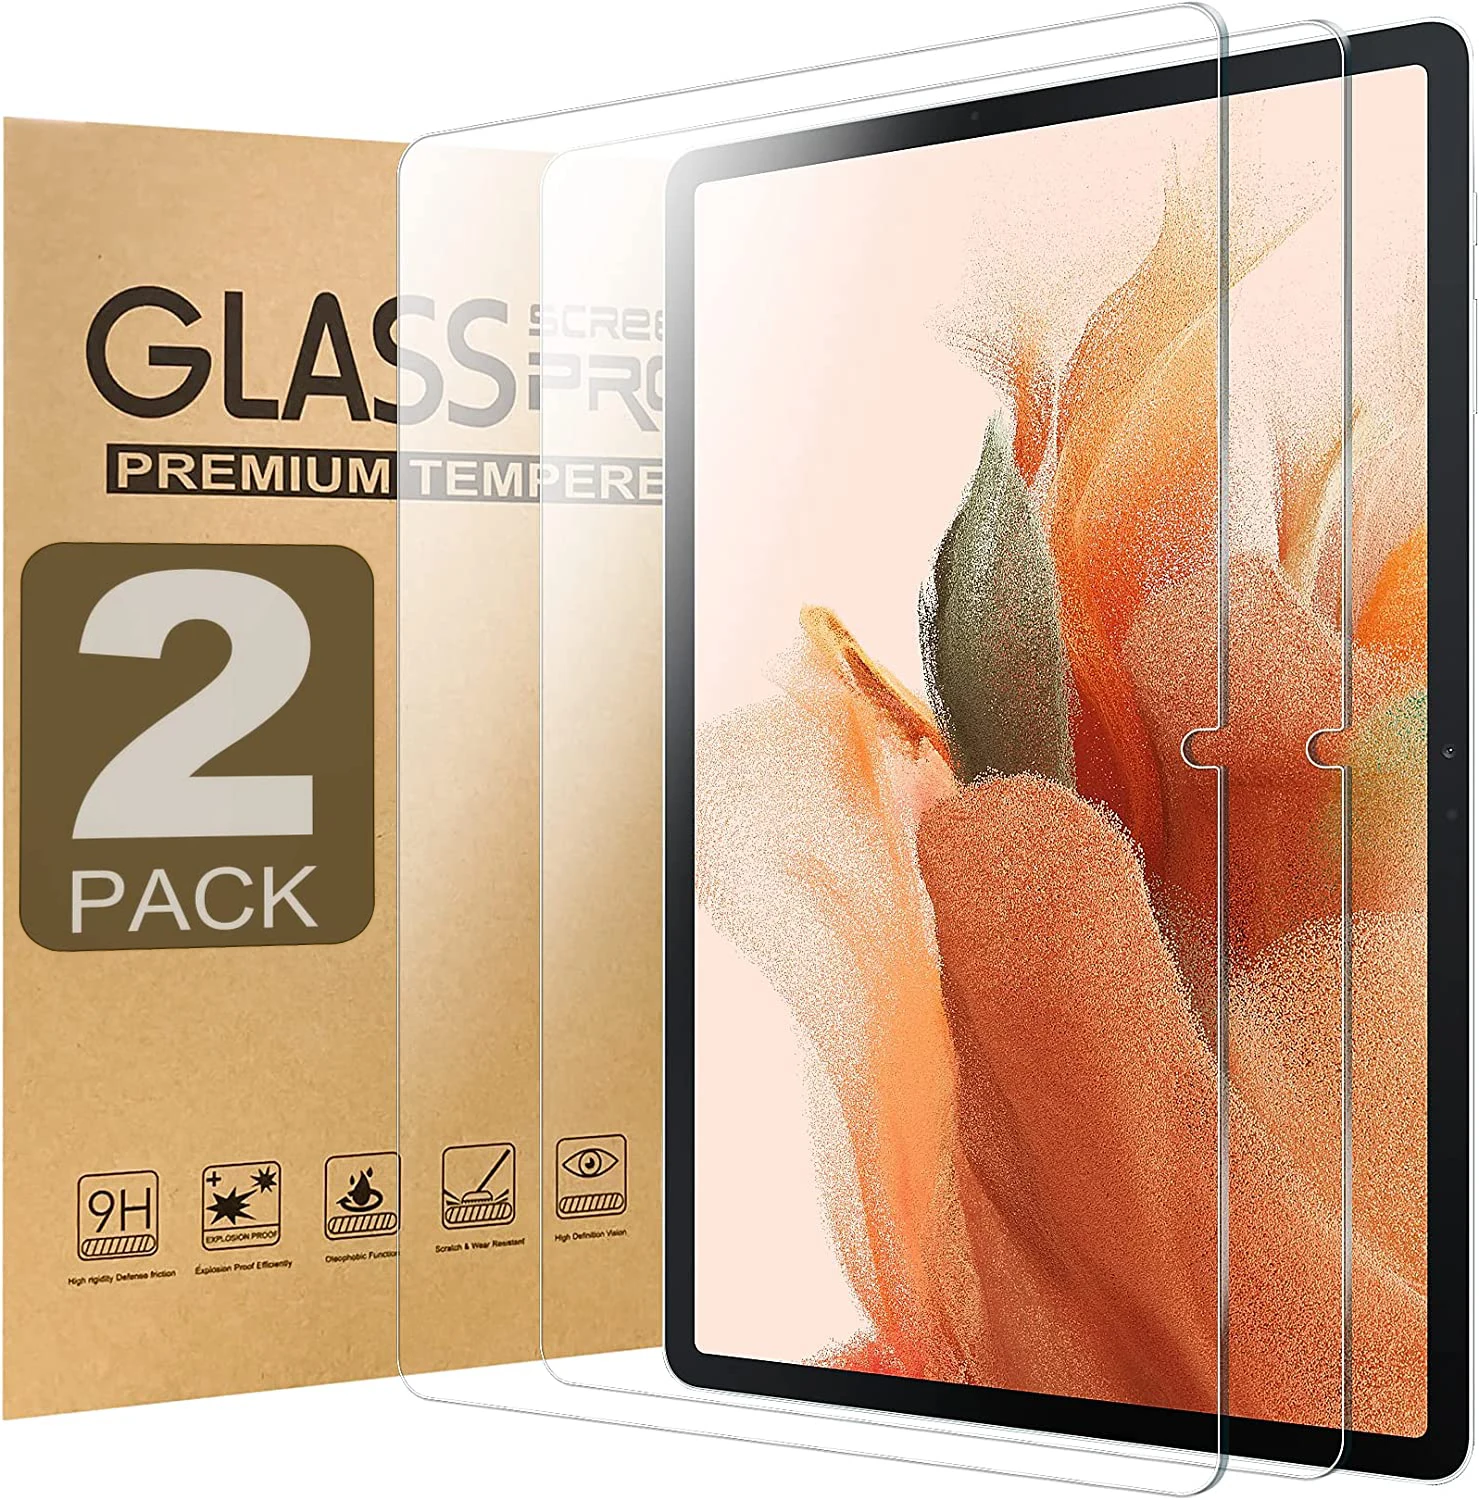 2pcs Screen Protector Tempered Glass For Samsung Galaxy S7 FE 12.4'' 2021 s7 fe SM-T730 SM-T735 SM-T736B HD Clear Tablet Film 9h tempered glass screen protector for samsung galaxy tab s7 fe 12 4 2021 glass sm t730 t733 t736b anti scratch protective film